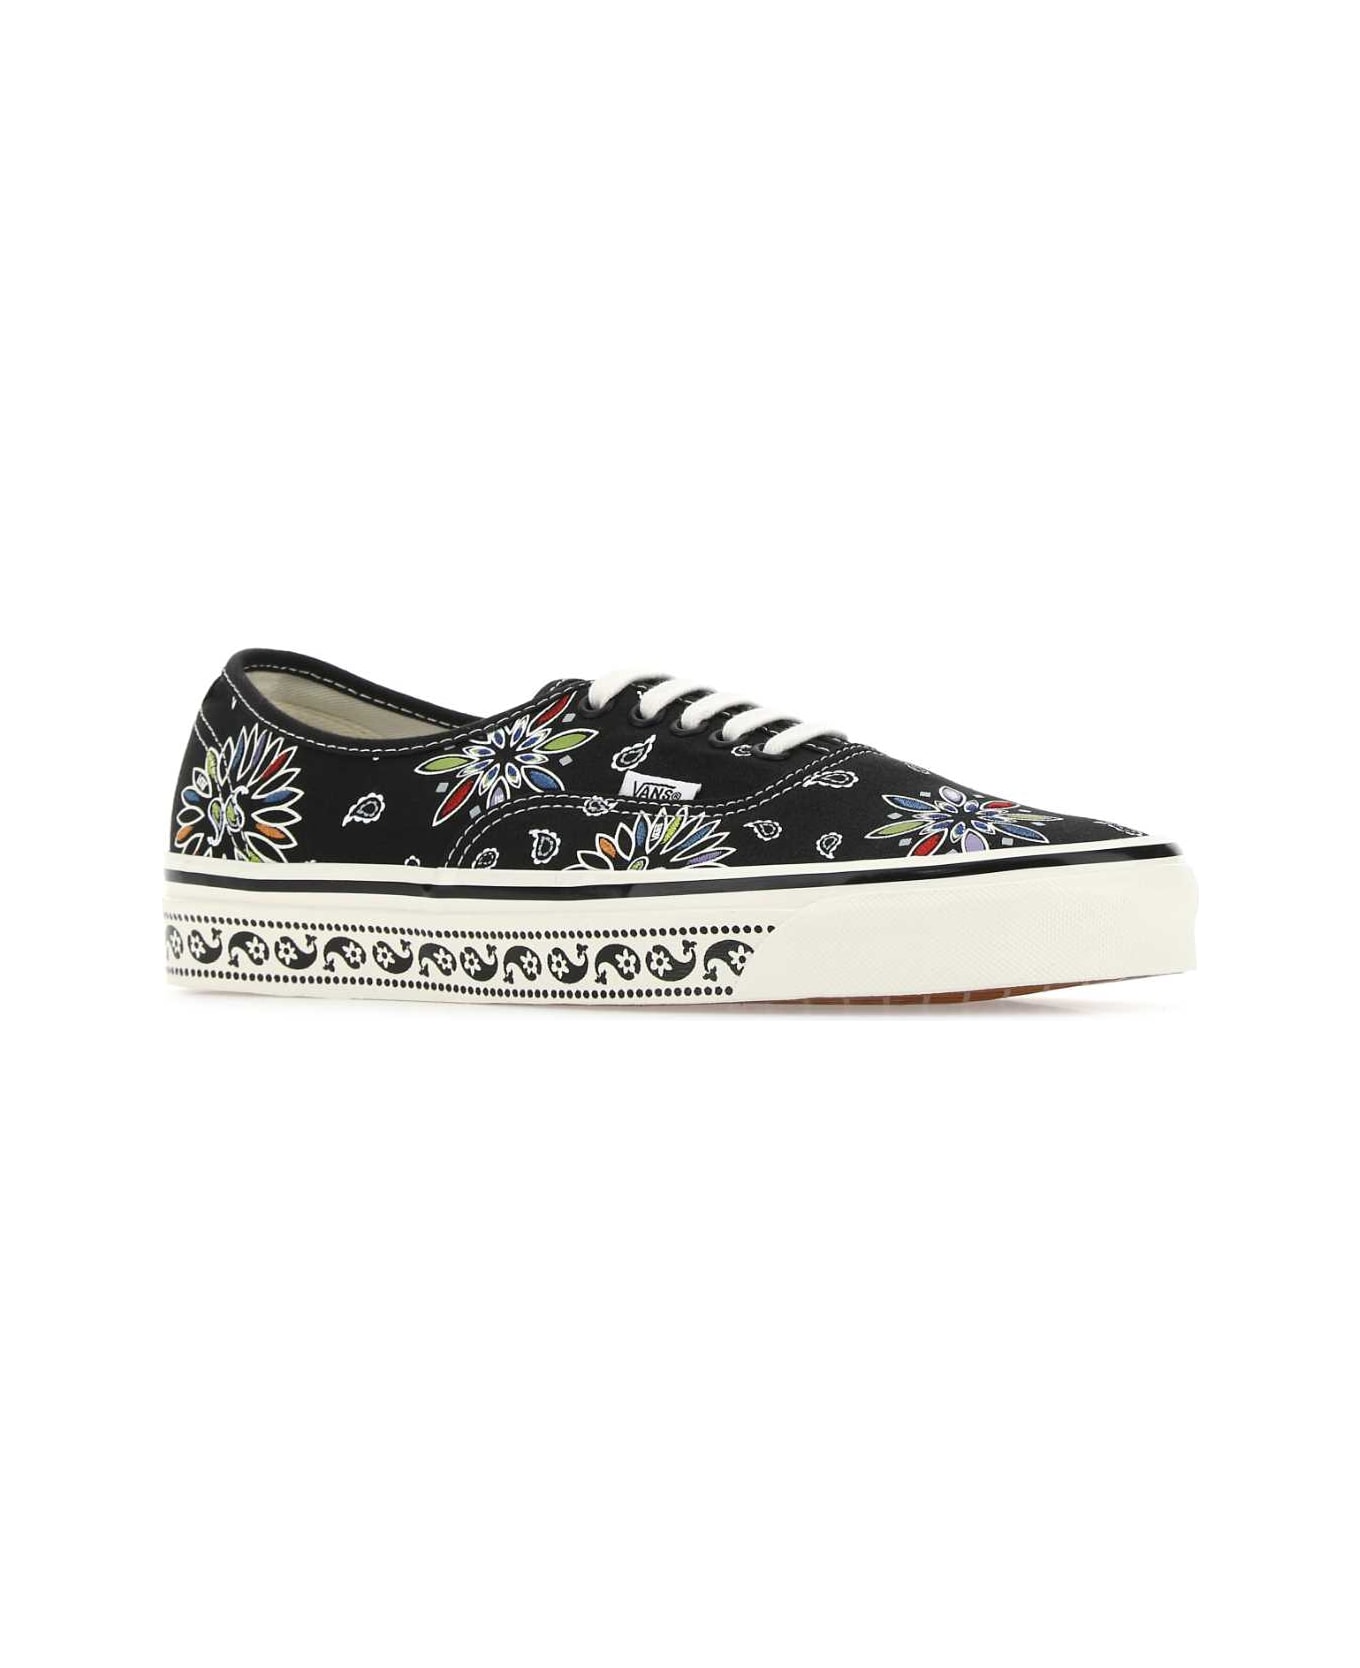 Vans Printed Canvas Anaheim Factory Authentic 44 Sneakers - 9GG1 スニーカー